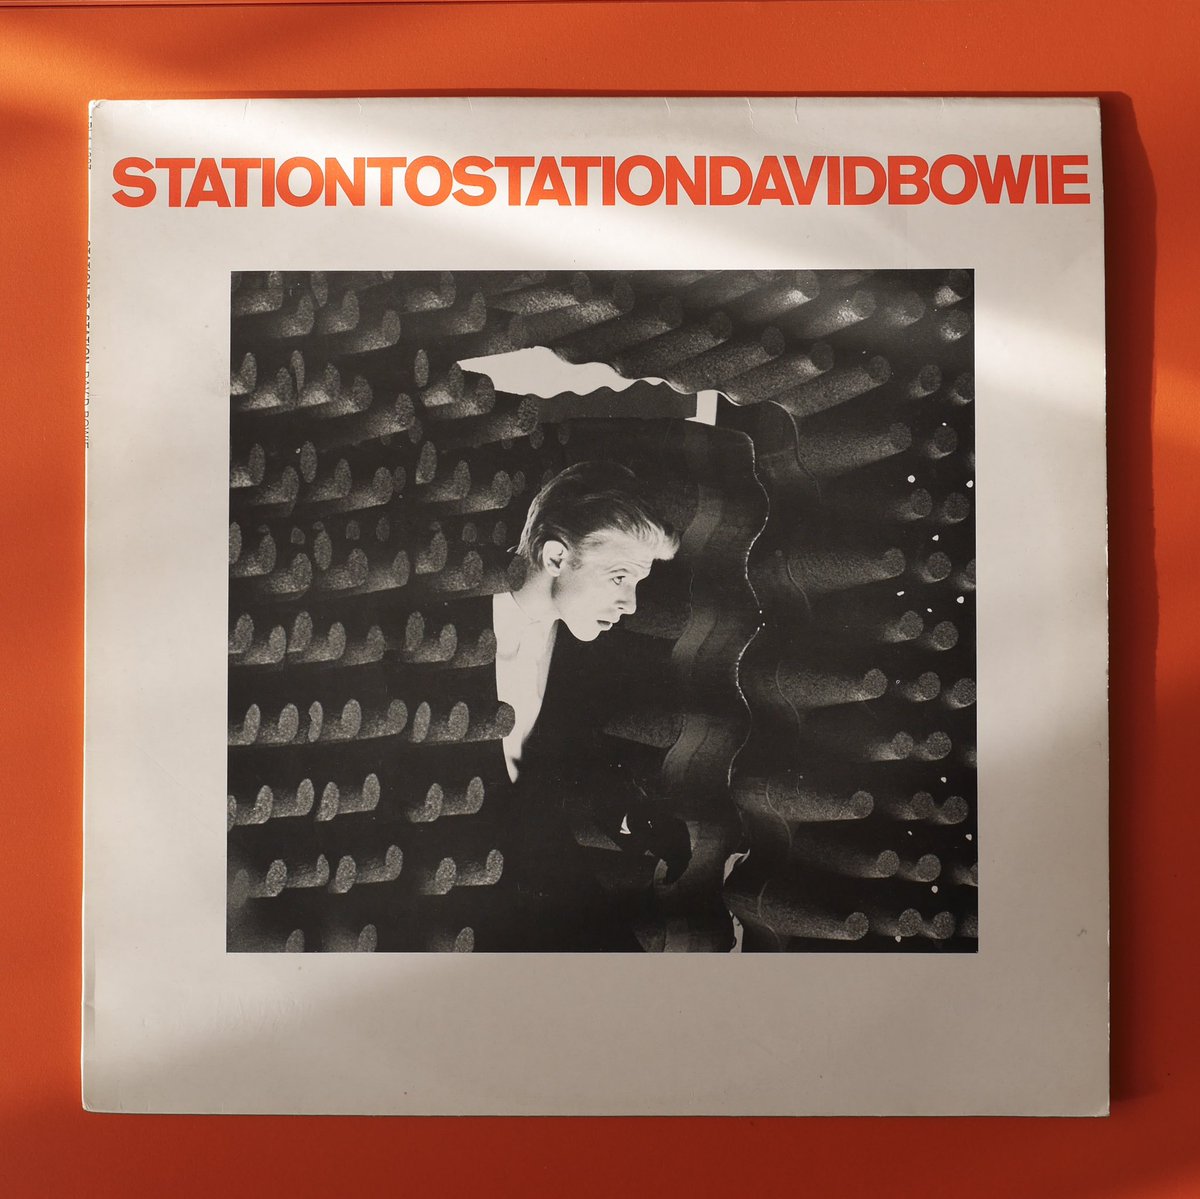 @BBC6Music Track?! I’ll start with #StationToStation and then take it from there. #BowieForever